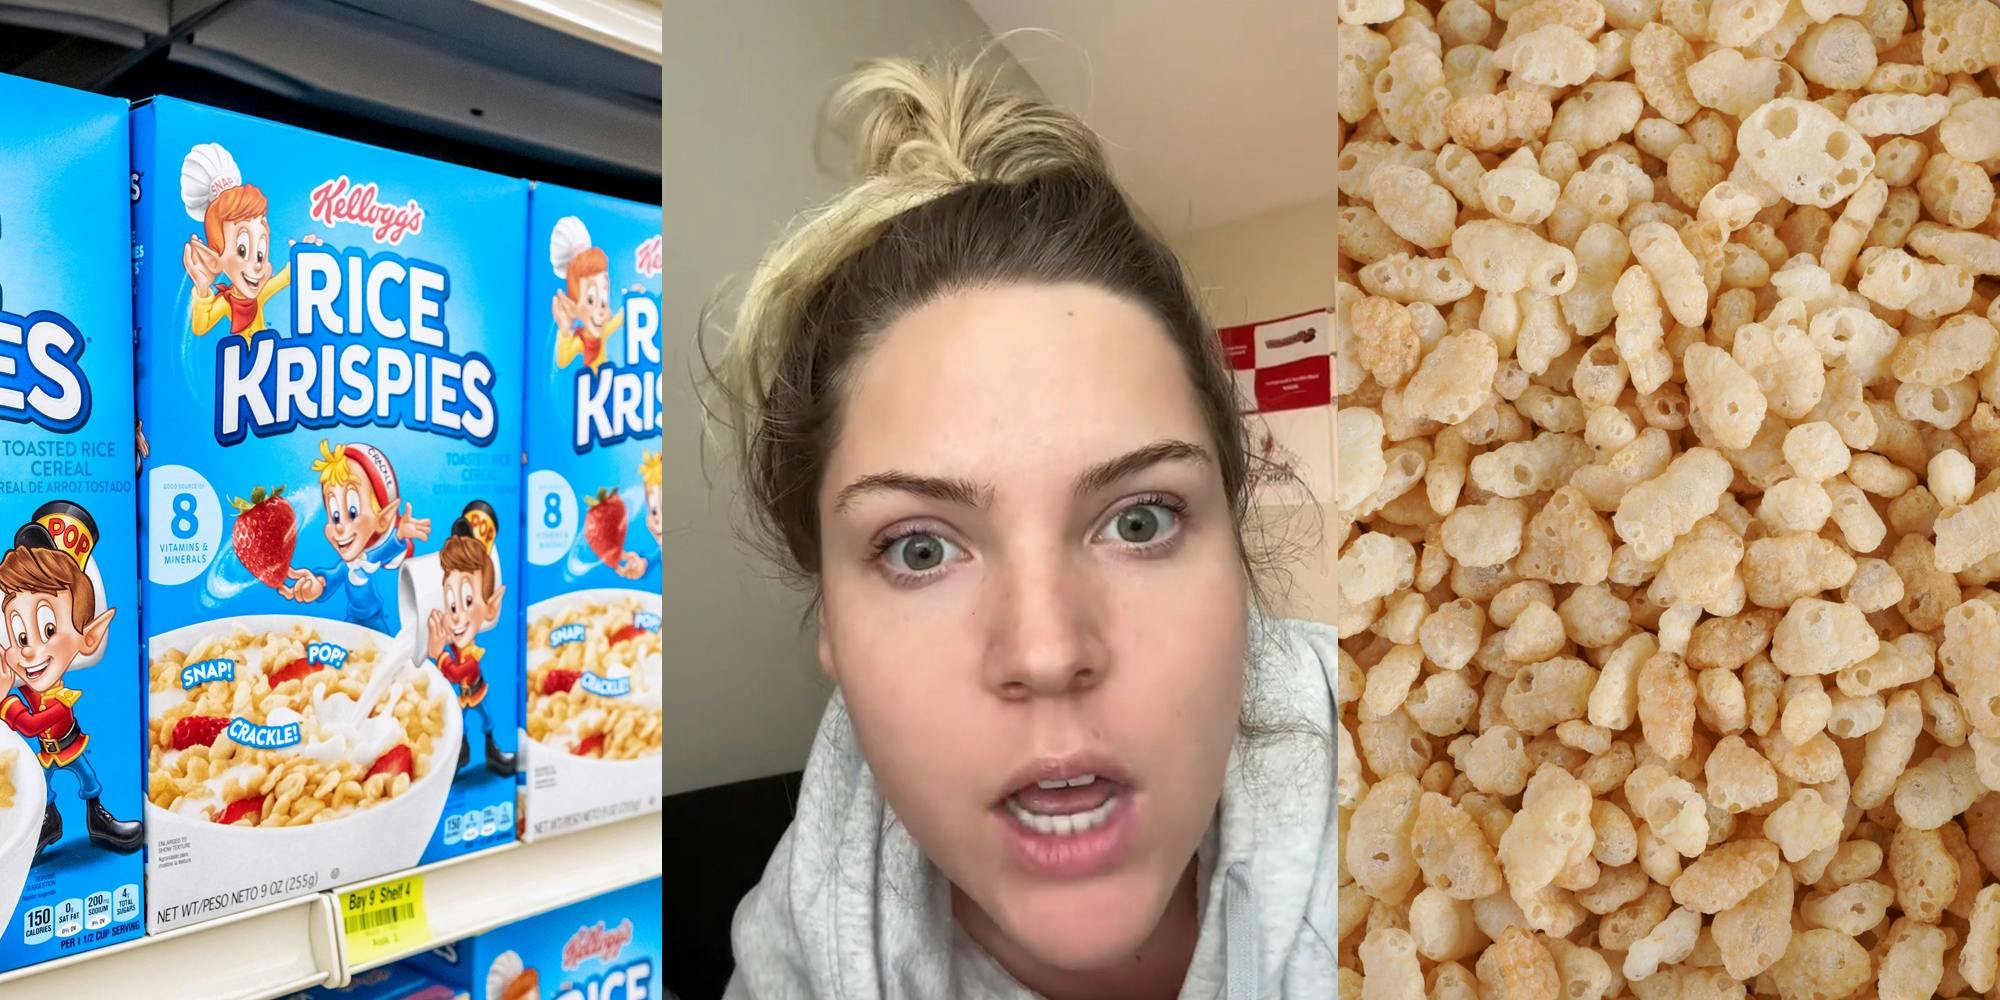 PR expert reveals Kellogg’s incident involving Rice Krispies that she says was covered up